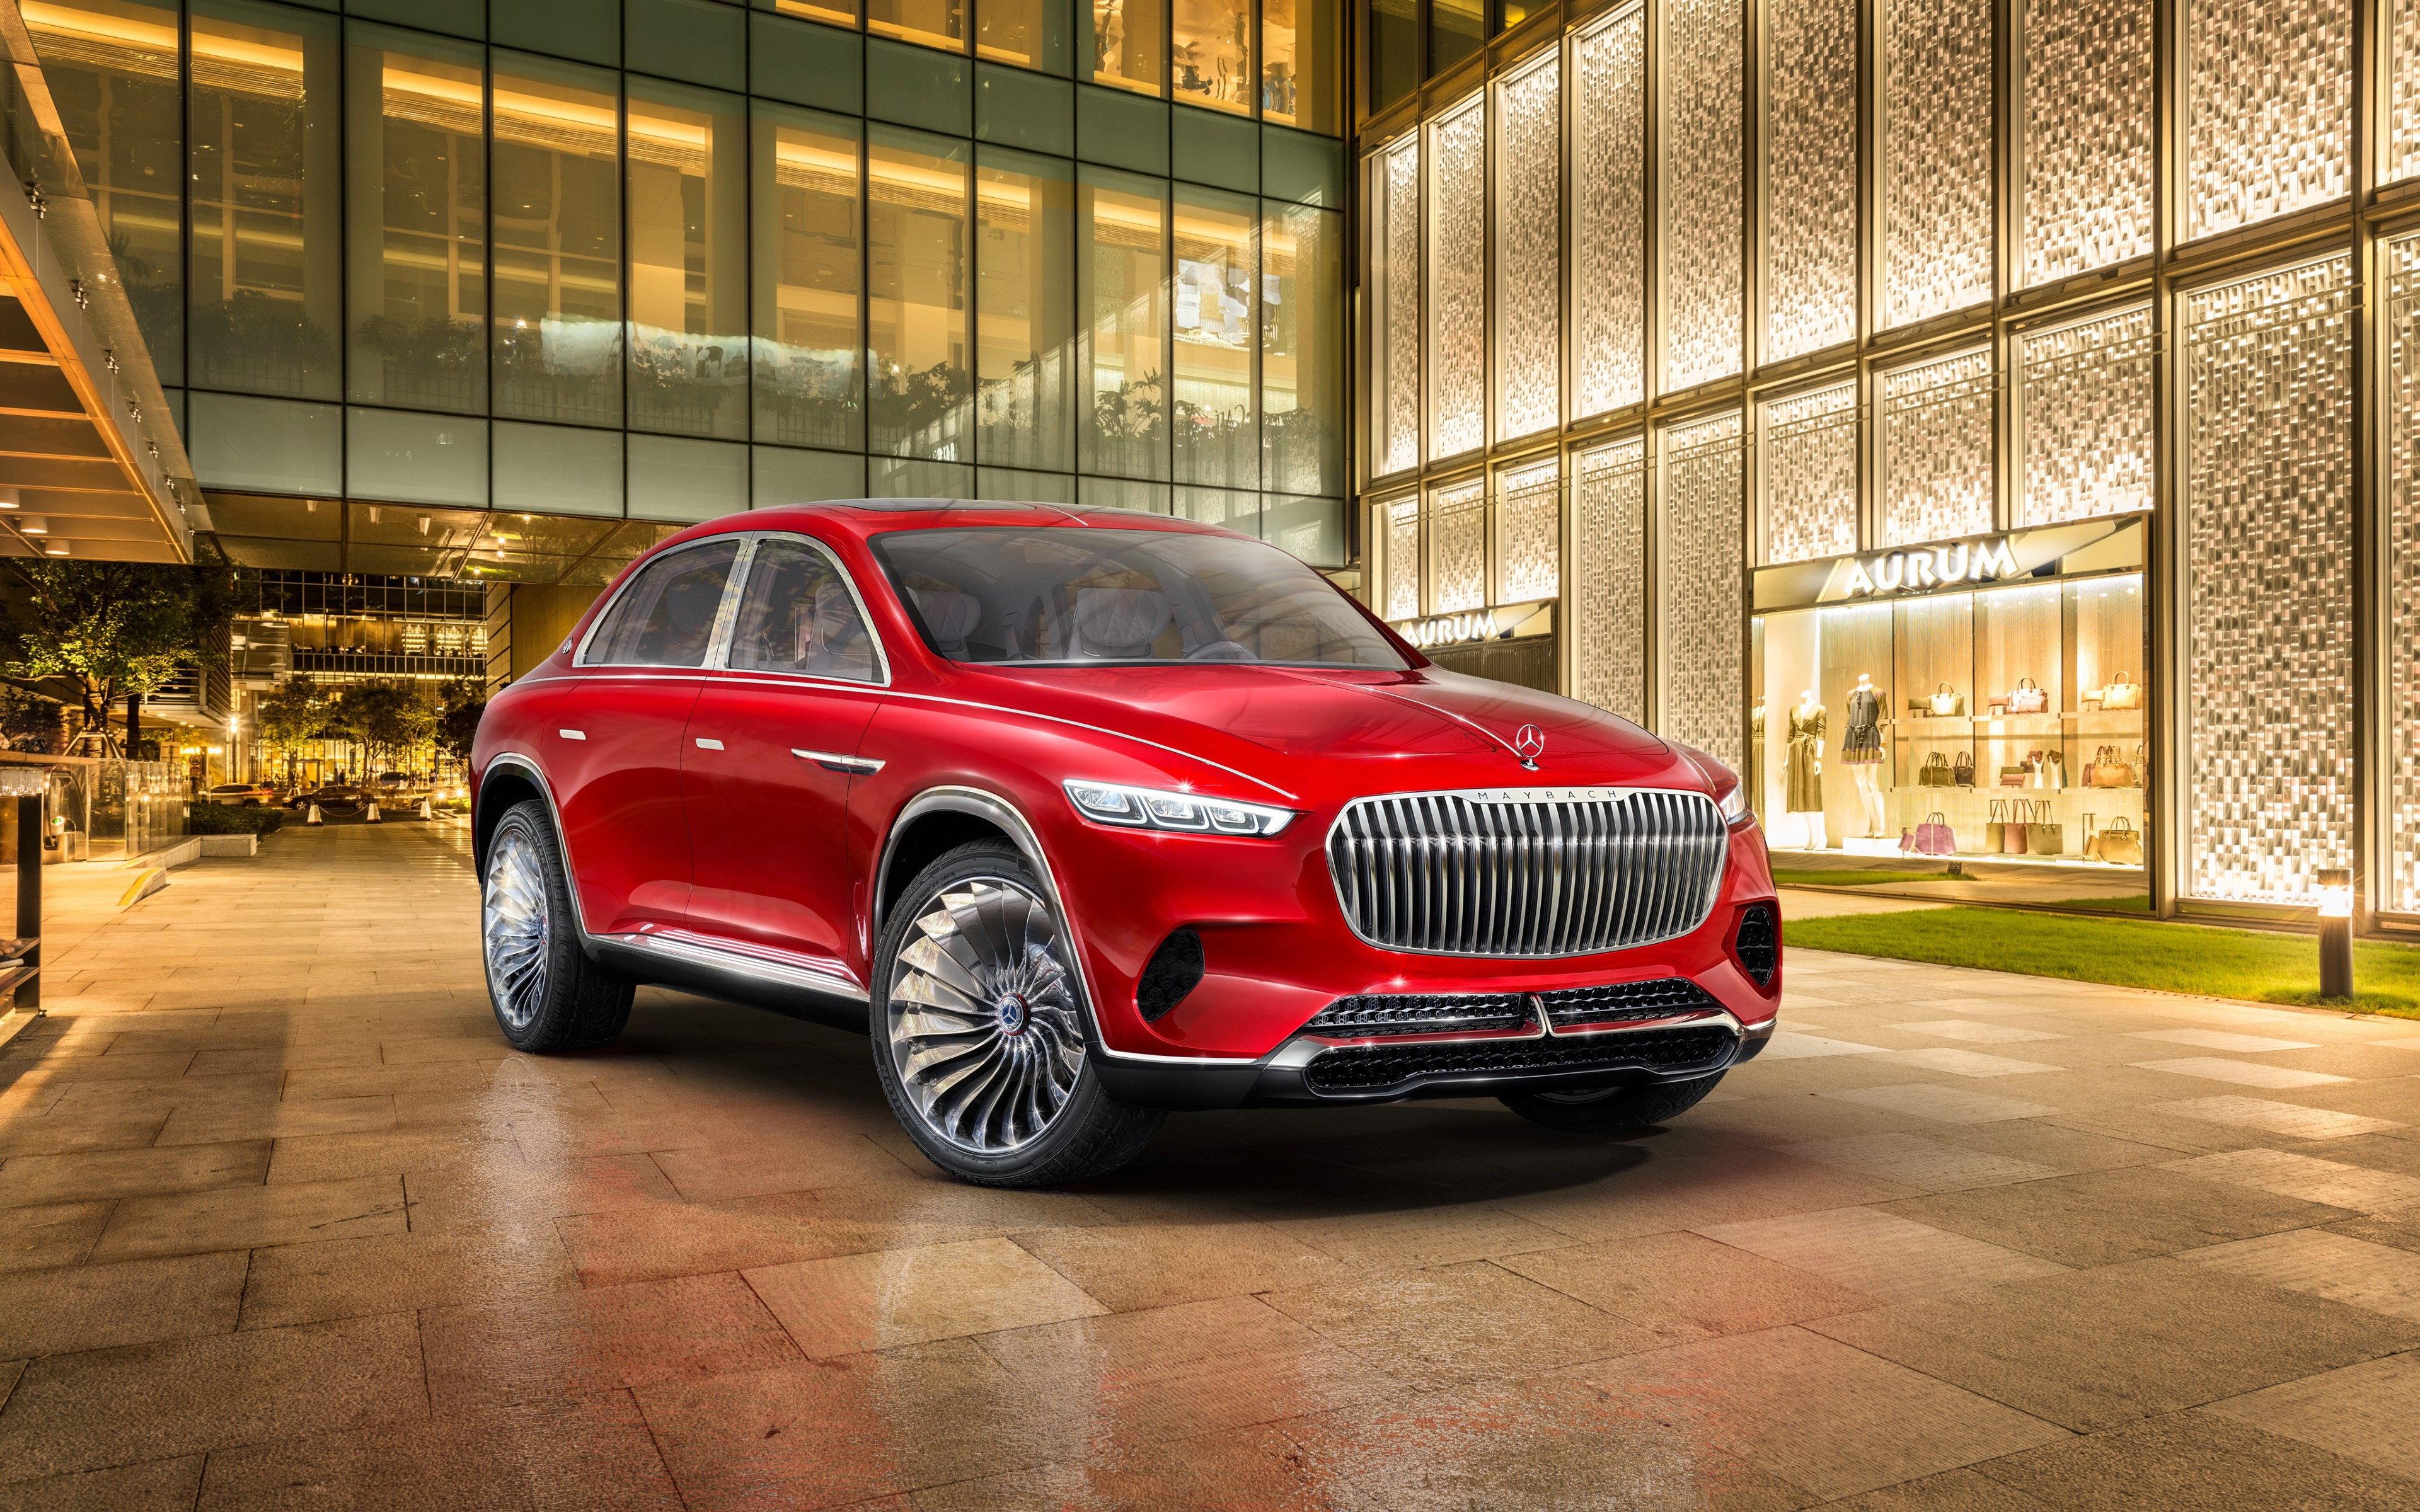 The Vision Mercedes Maybach Ultimate Luxury wallpaper 3840x2400